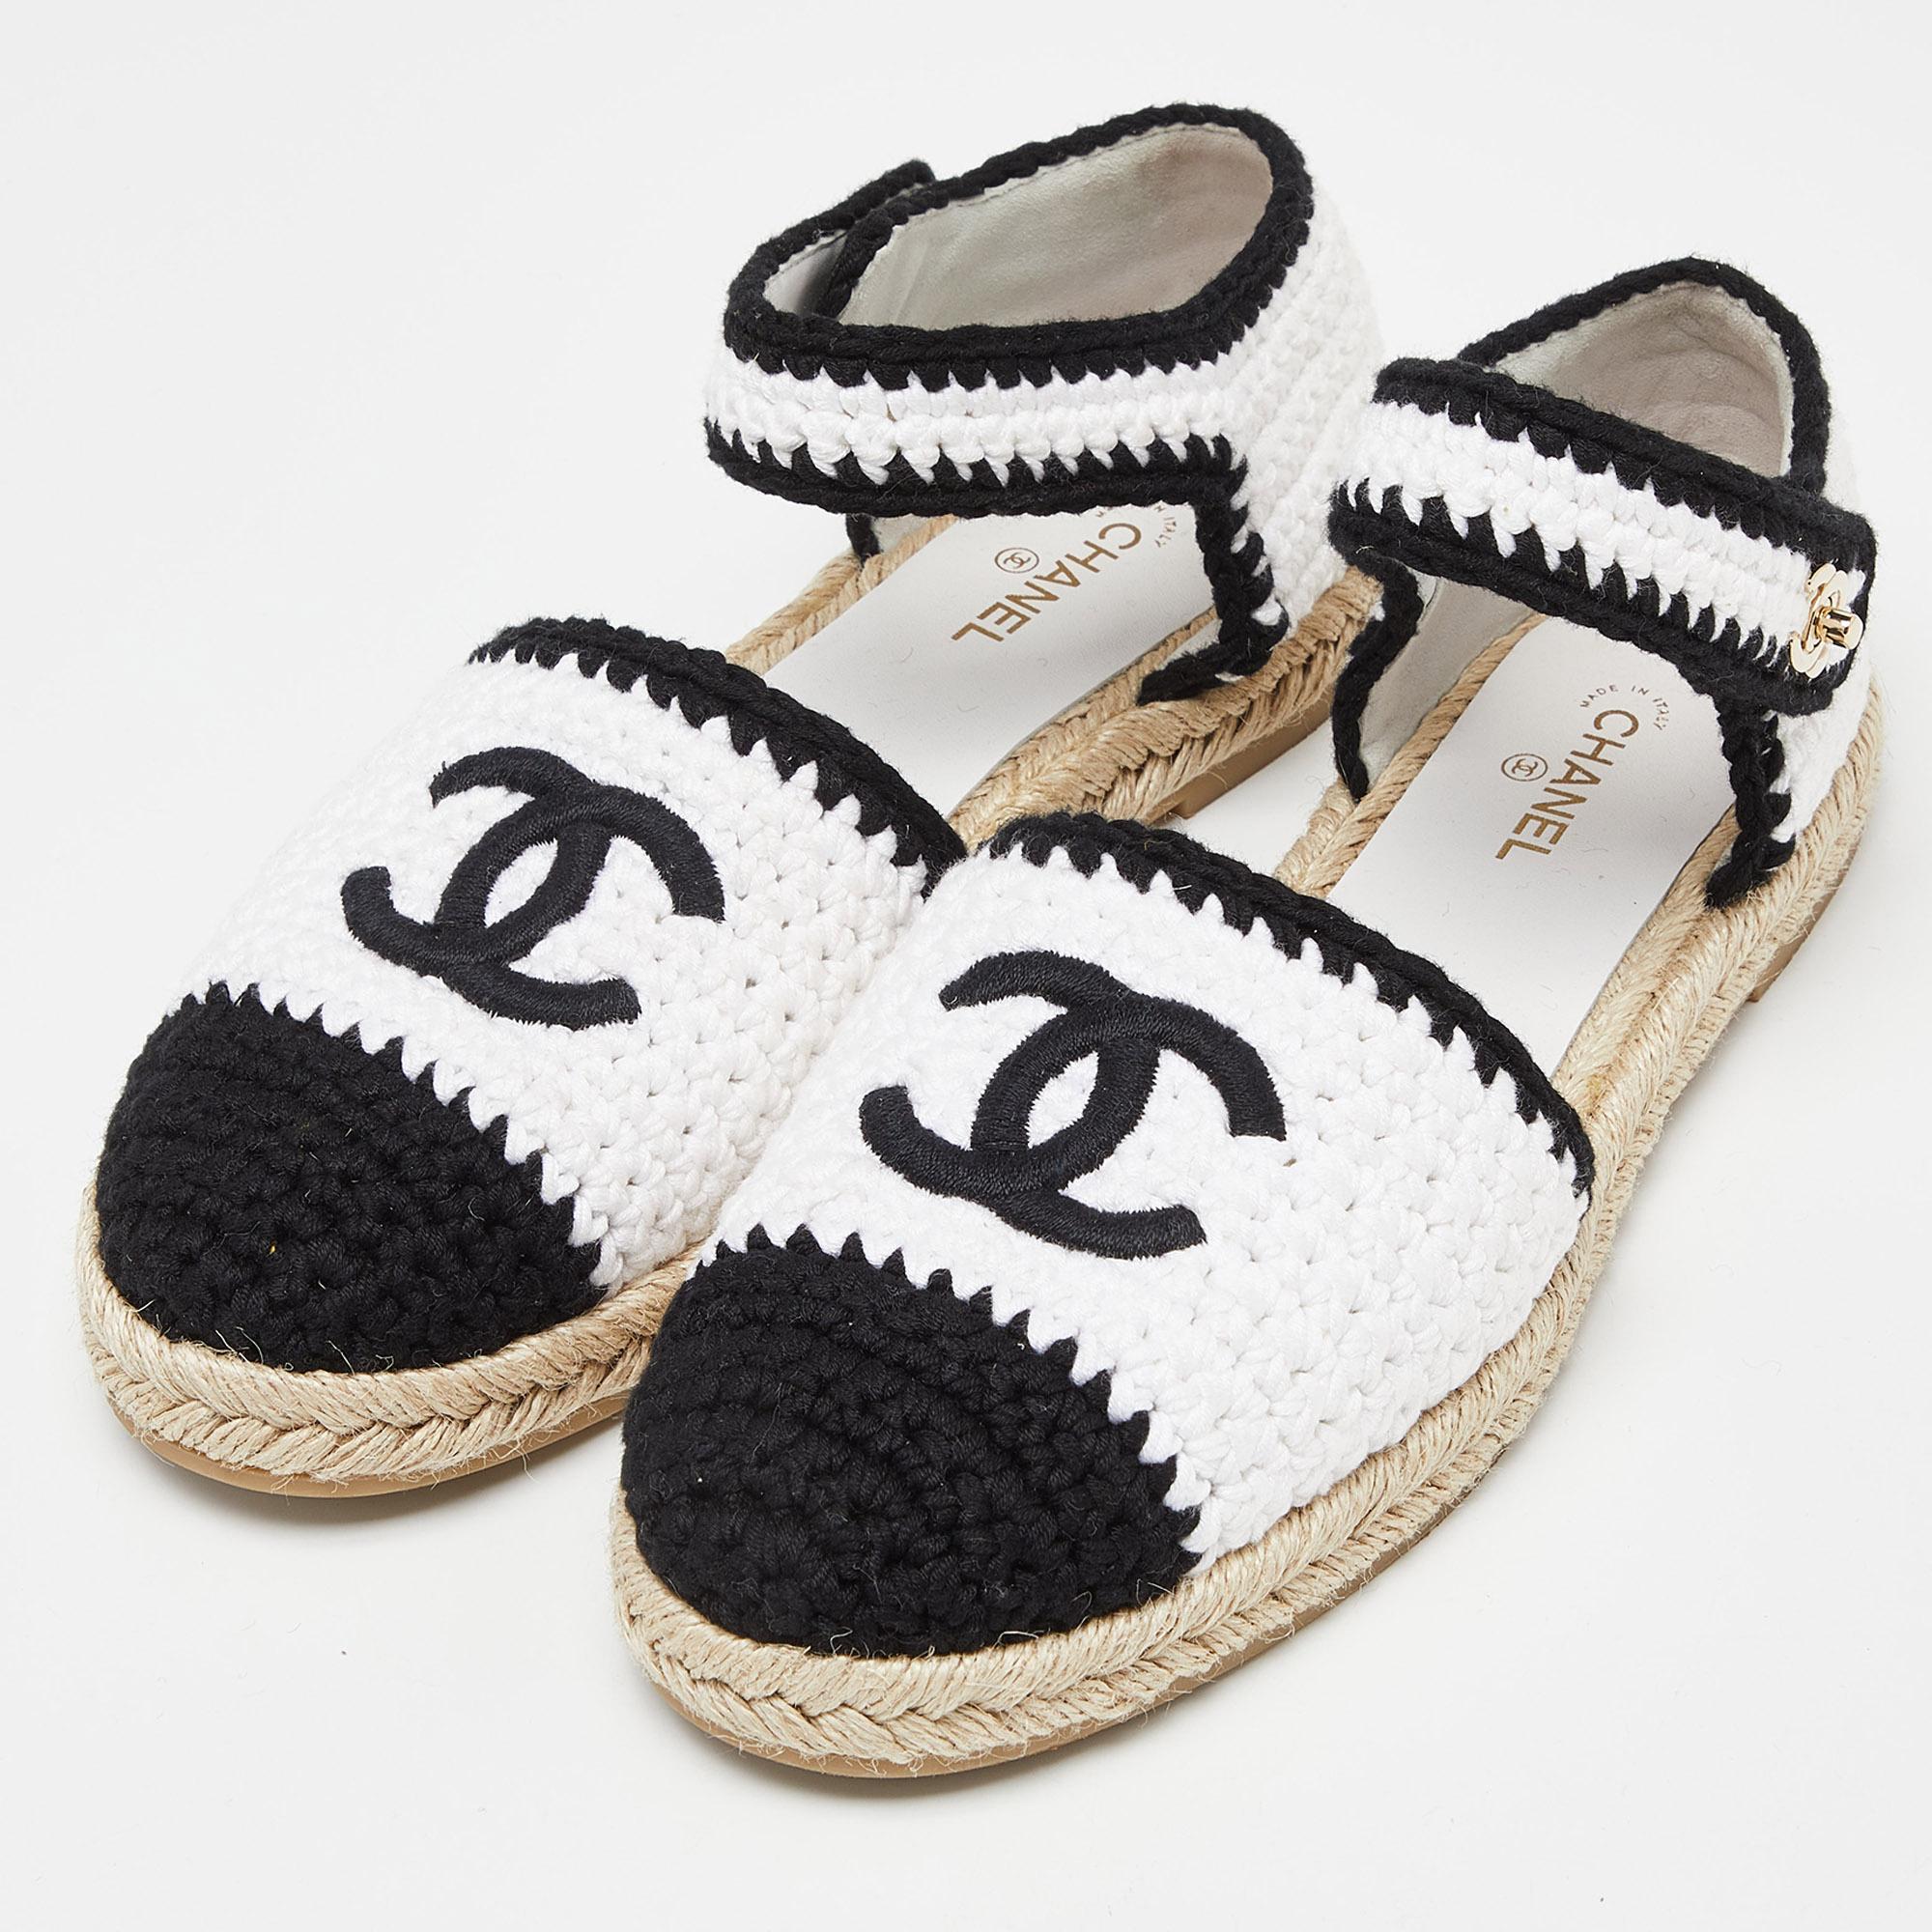 Crafted with meticulous attention to detail, these Chanel ankle strap espadrilles redefine casual chic. The intricate crochet pattern in white and black cotton blend exudes effortless style. Featuring a comfortable ankle strap and classic espadrille